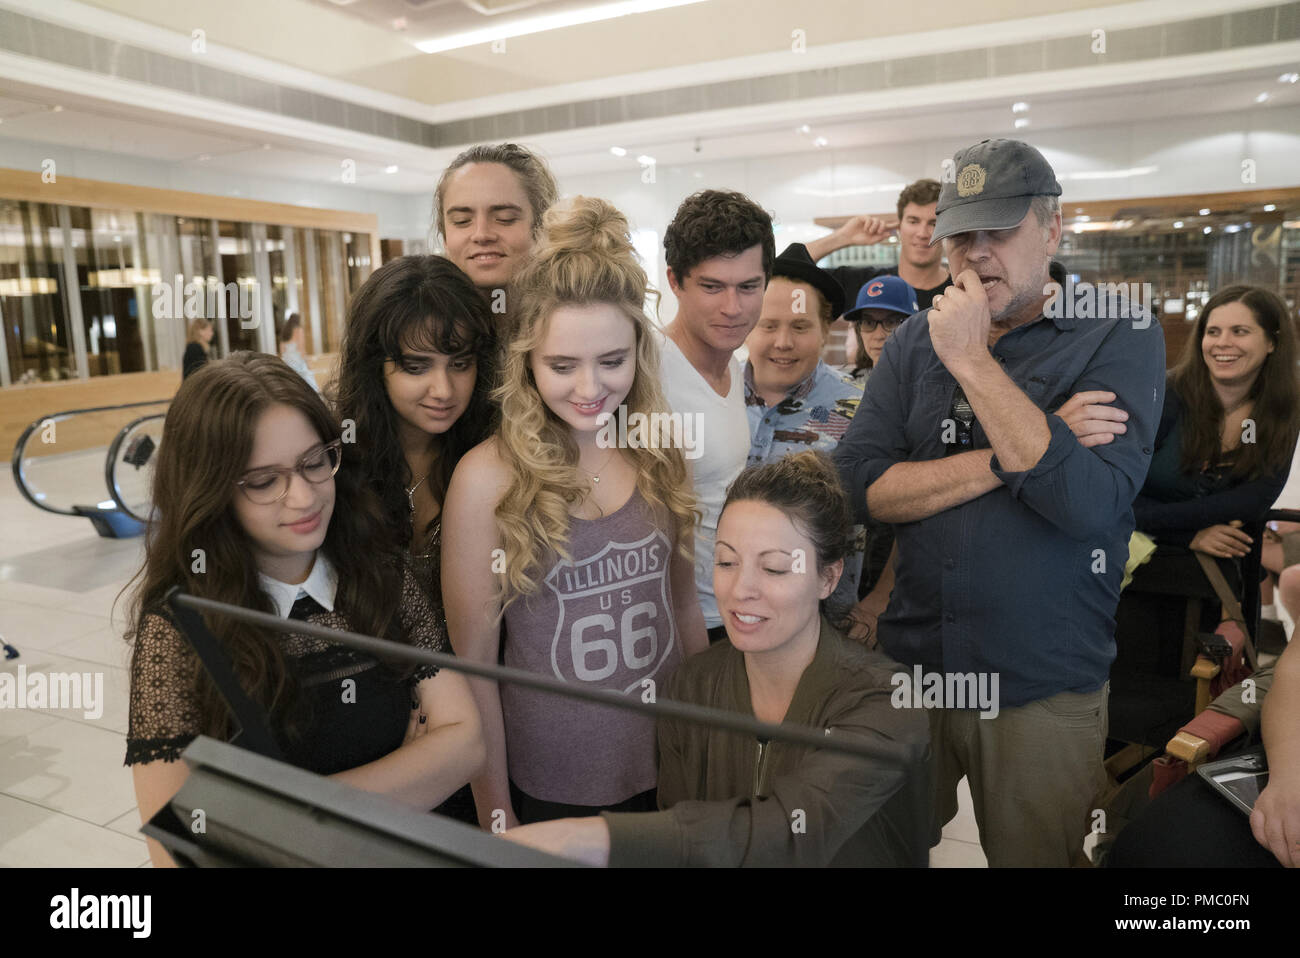 (L to R, foreground) GIDEON ADLON as Sam, GERALDINE VISWANATHAN as Kayla, MILES ROBBINS as Connor, KATHRYN NEWTON as Julie, GRAHAM PHILLIPS as Austin, director KAY CANNON and JIMMY BELLINGER as Chad in 'Blockers,' the directorial debut of Cannon (writer of the 'Pitch Perfect' series).  When three parents discover their daughters’ pact to lose their virginity at prom, they launch a covert one-night operation to stop the teens from sealing the deal. 2018 Universal Studios Stock Photo